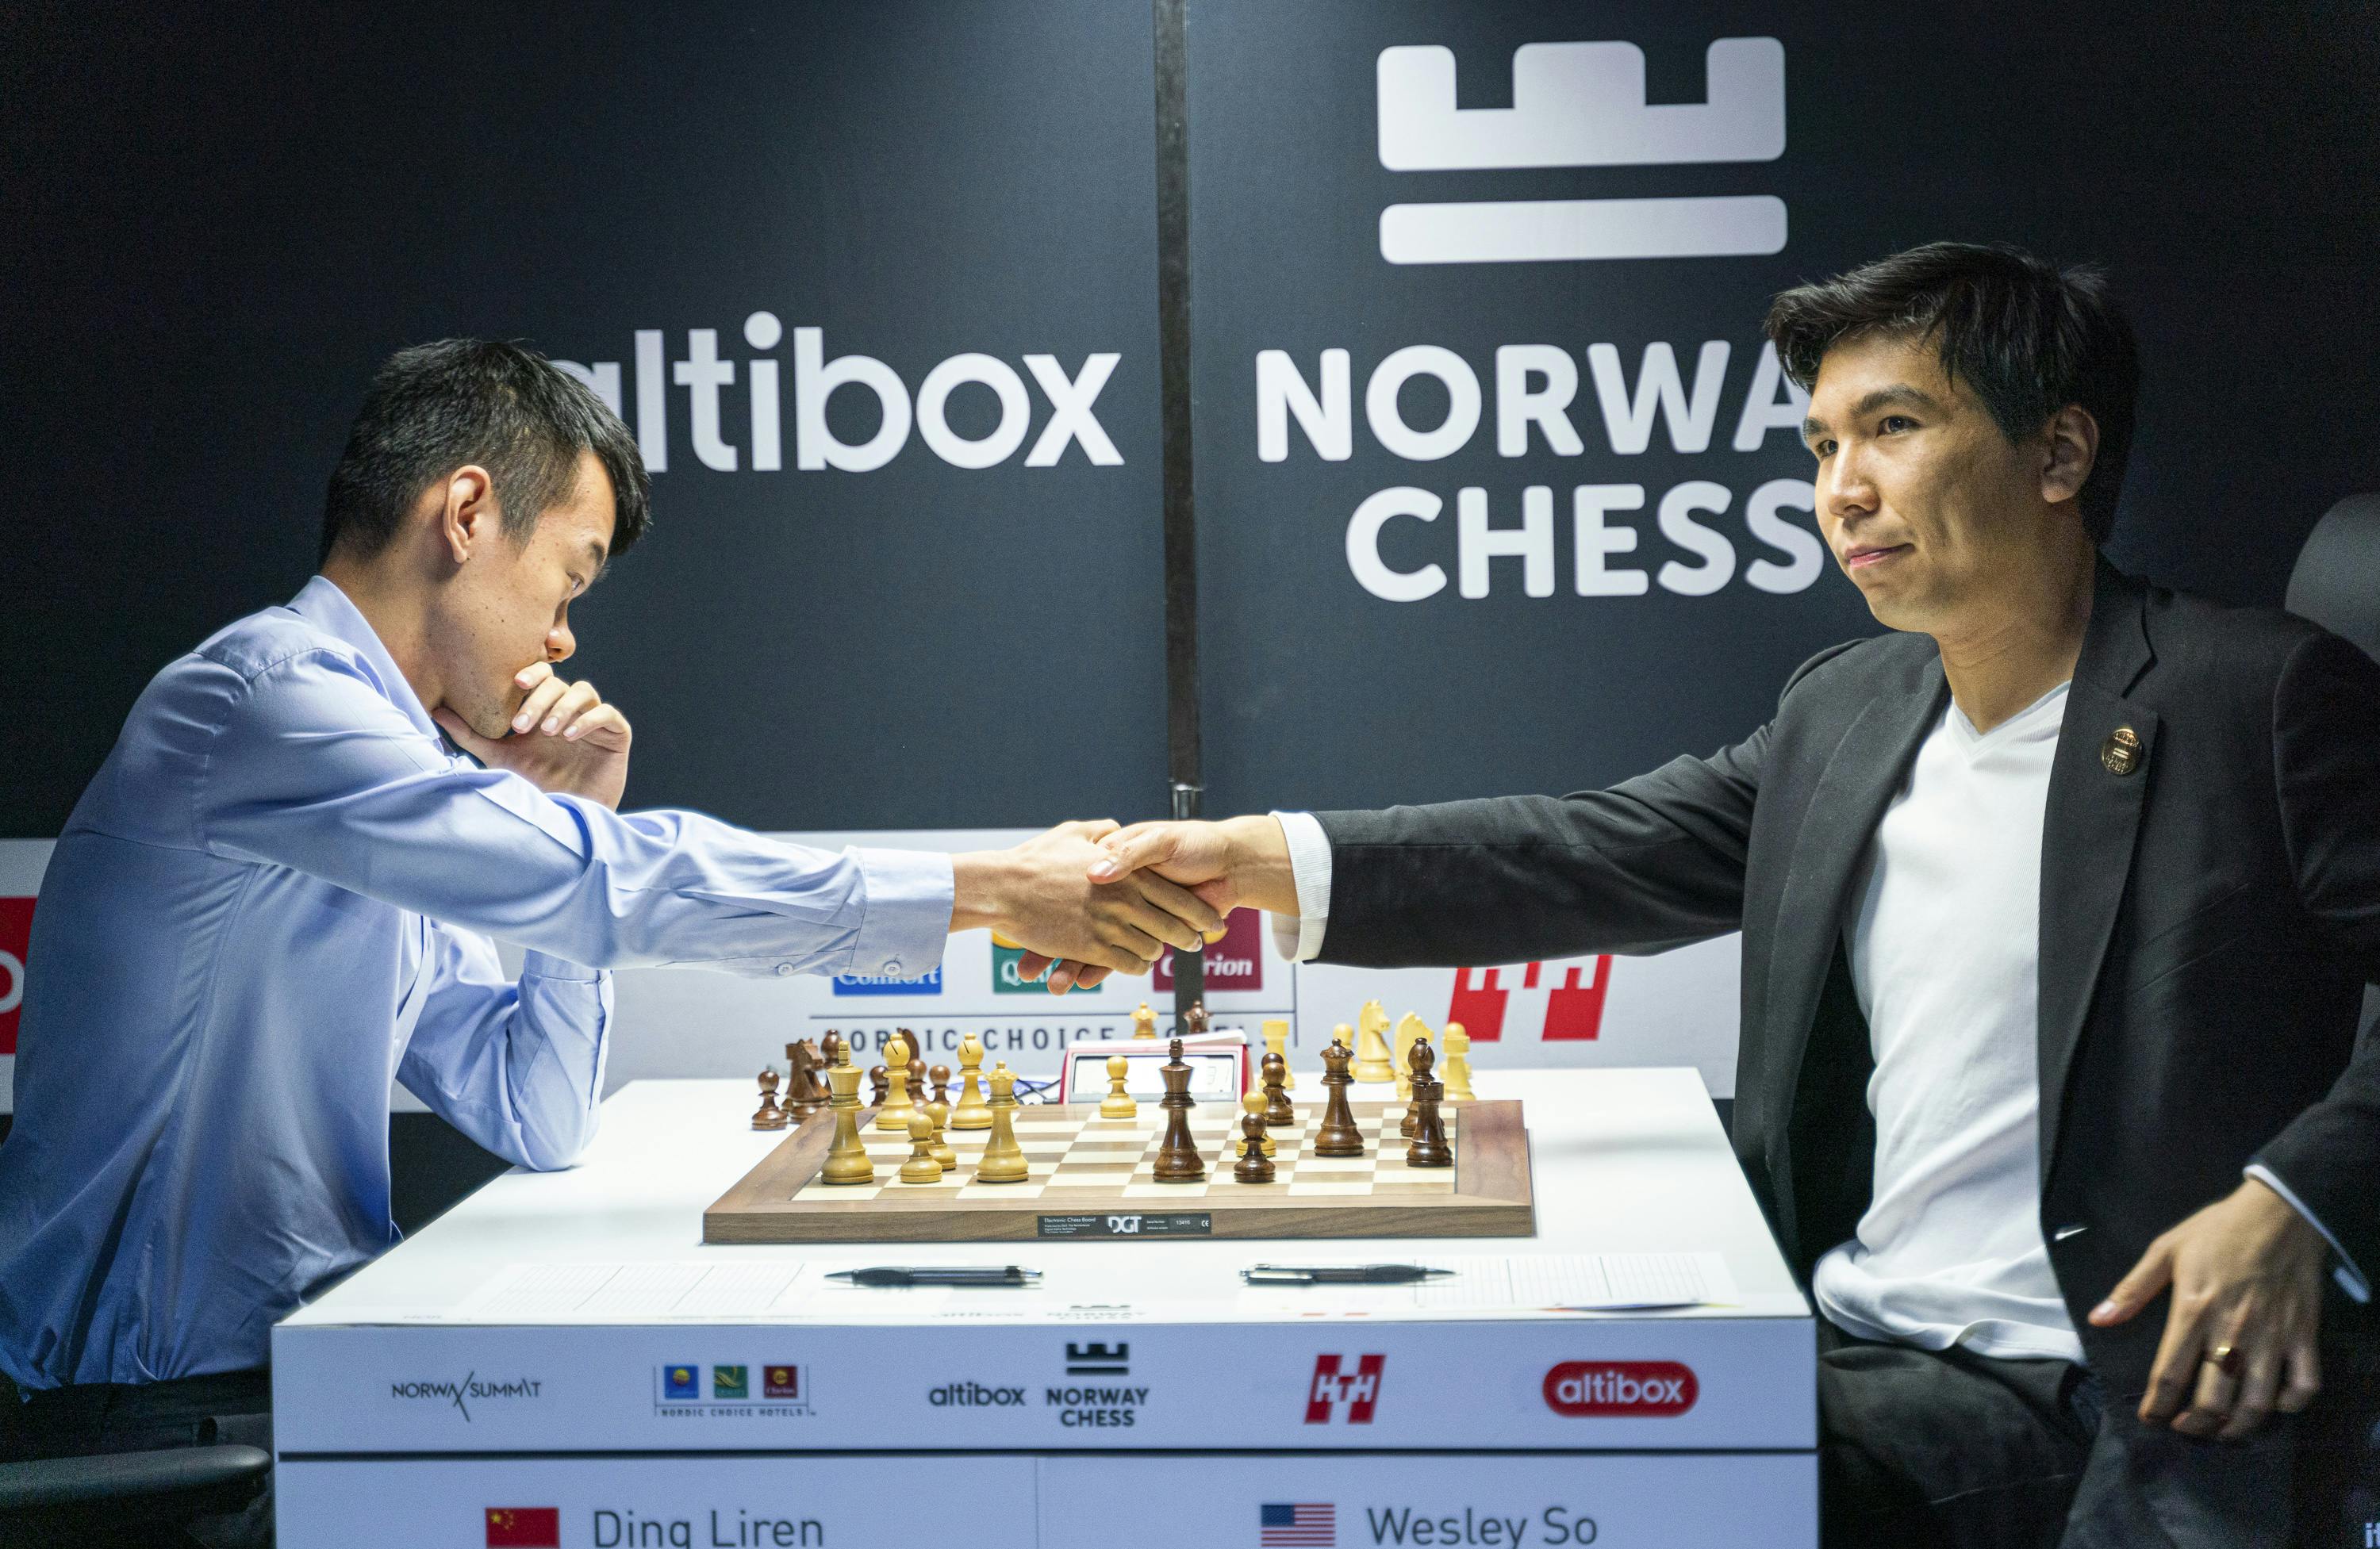 Ding Liren beats Wesley So in the first Armageddon game of the tournament.